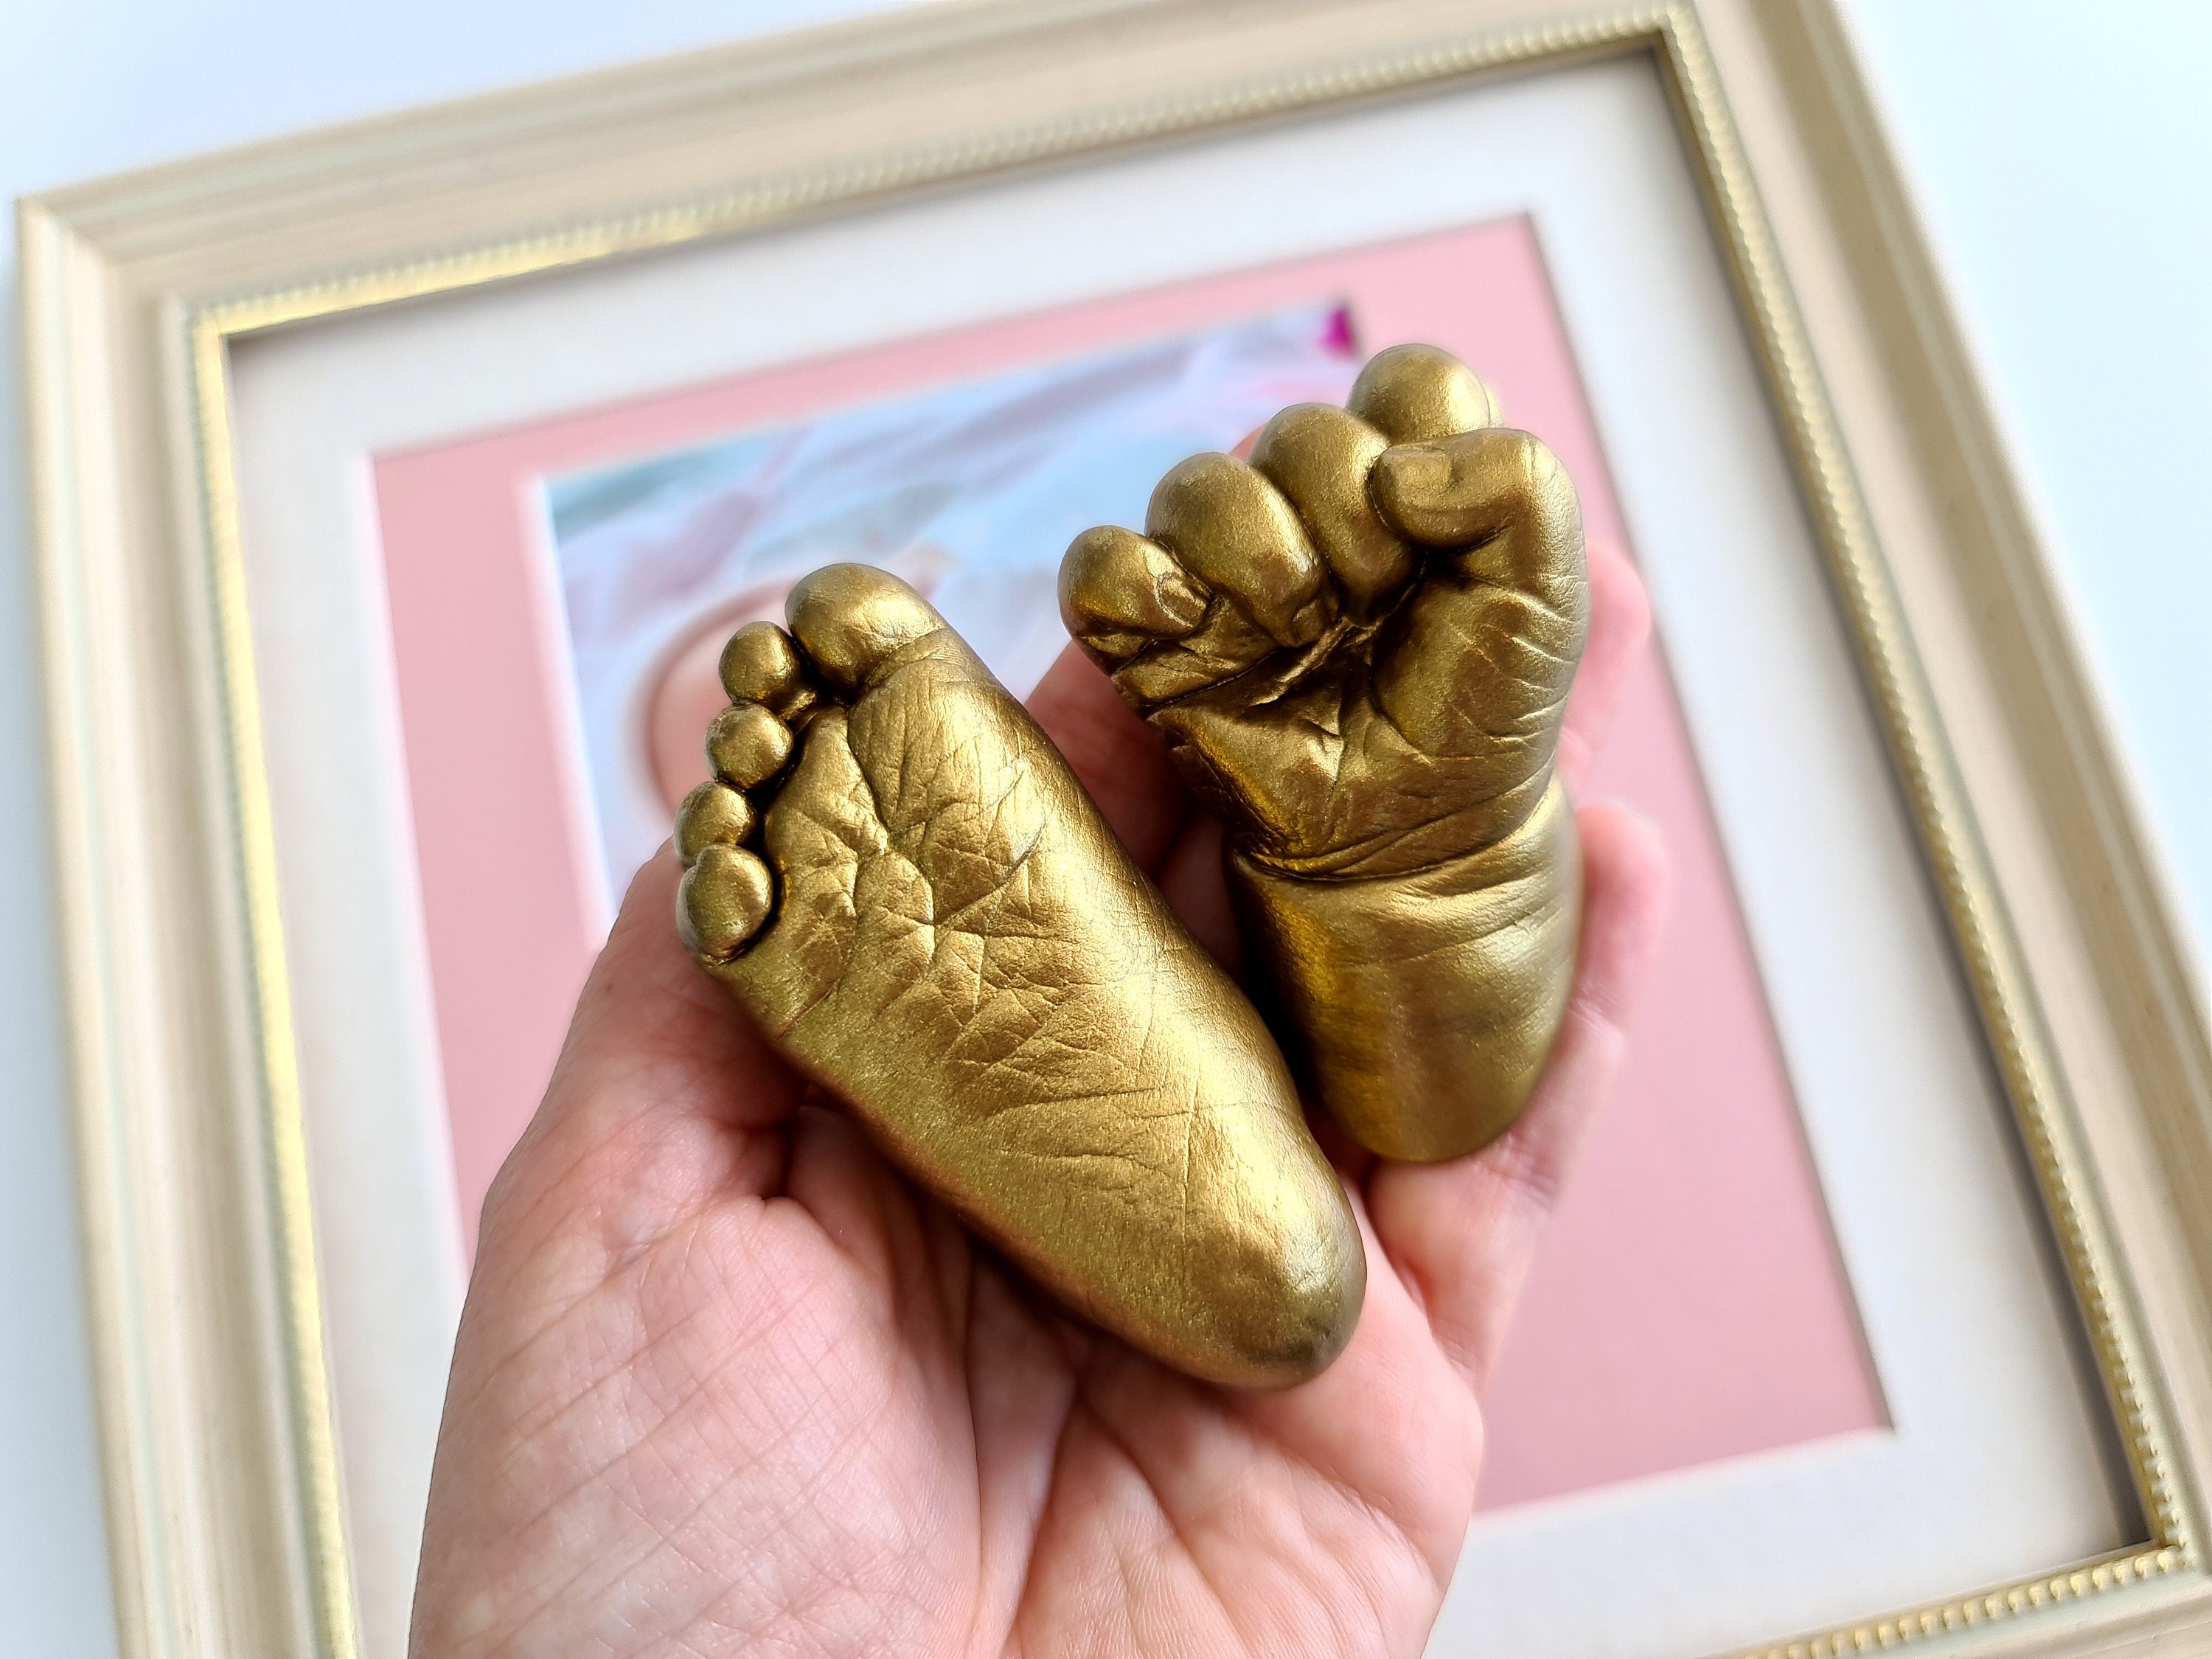 Baby Hand and Feet Casting-diy Casting Kit-footprint-baby Imprint